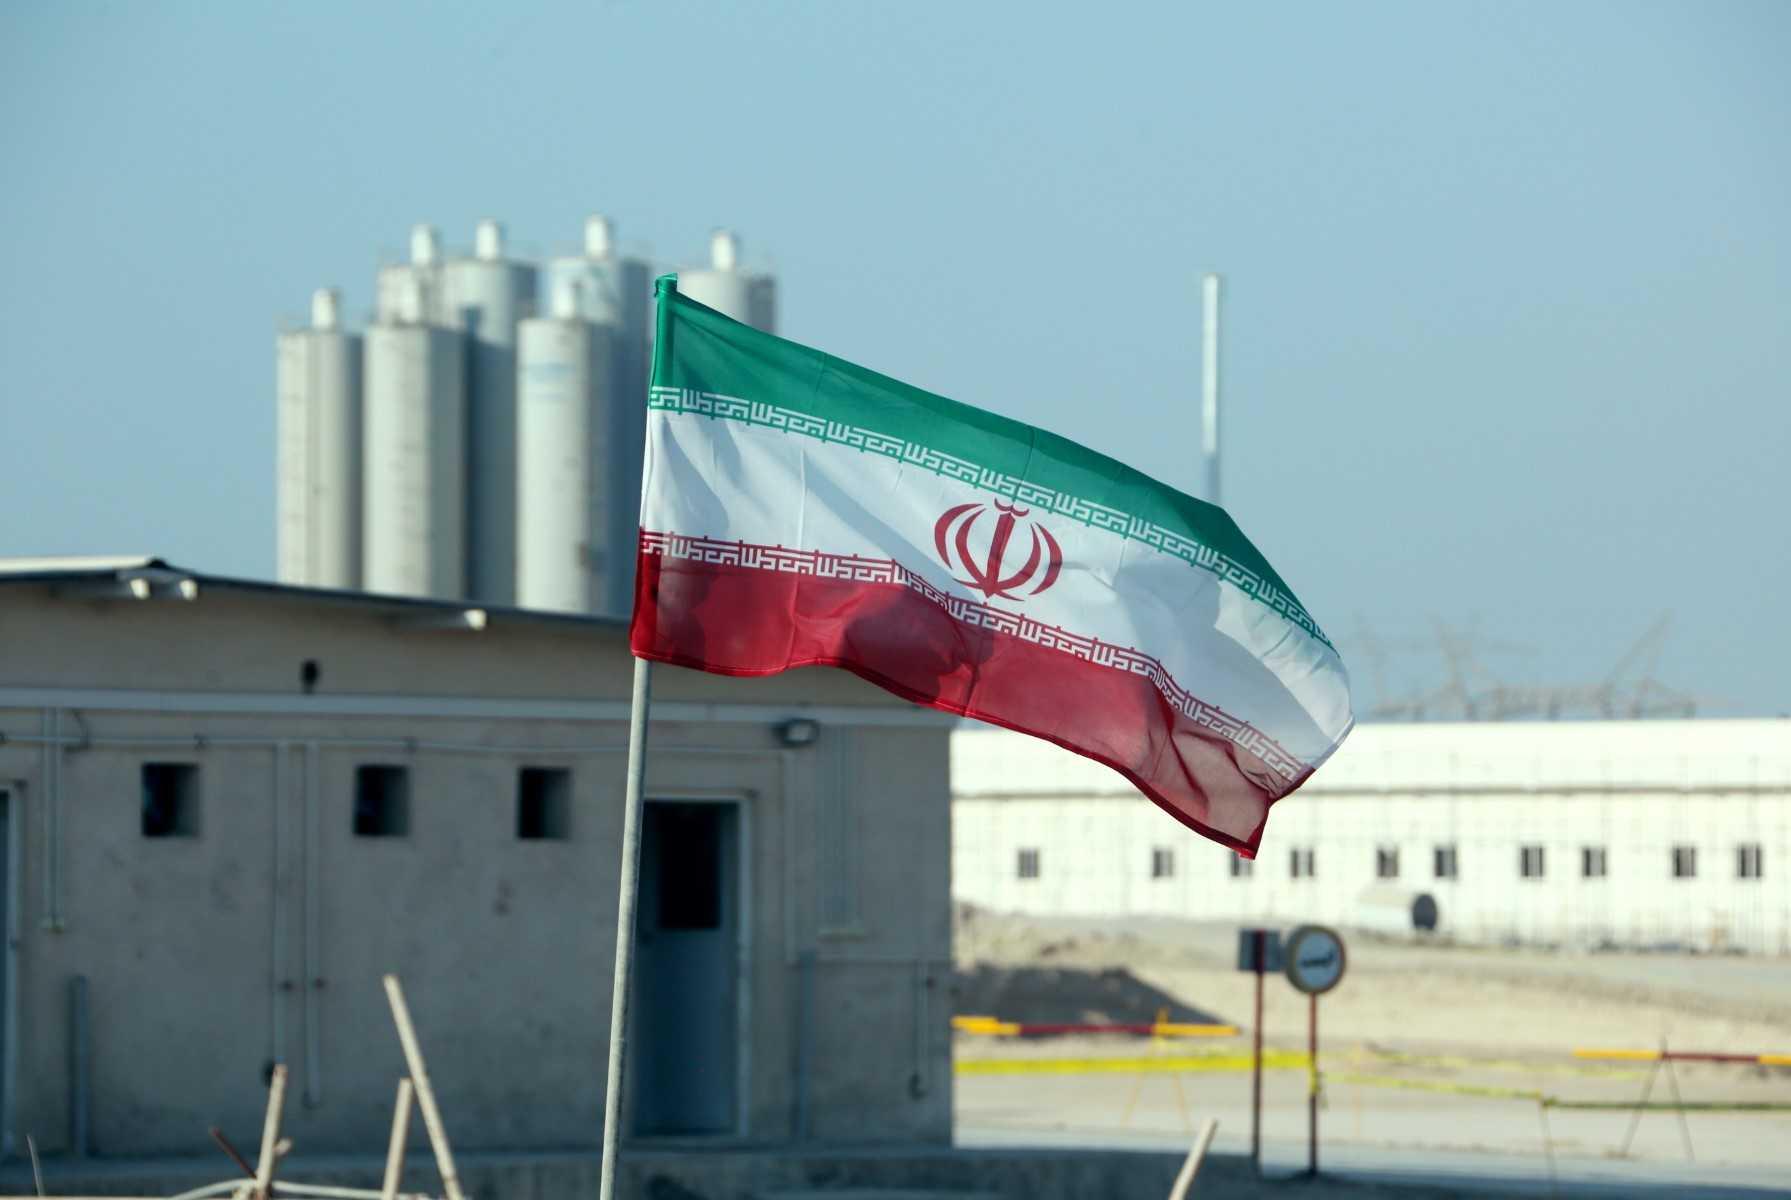 A picture taken on Nov 10, 2019, shows an Iranian flag in Iran's Bushehr nuclear power plant, during an official ceremony to kick-start works on a second reactor at the facility. Photo: AFP